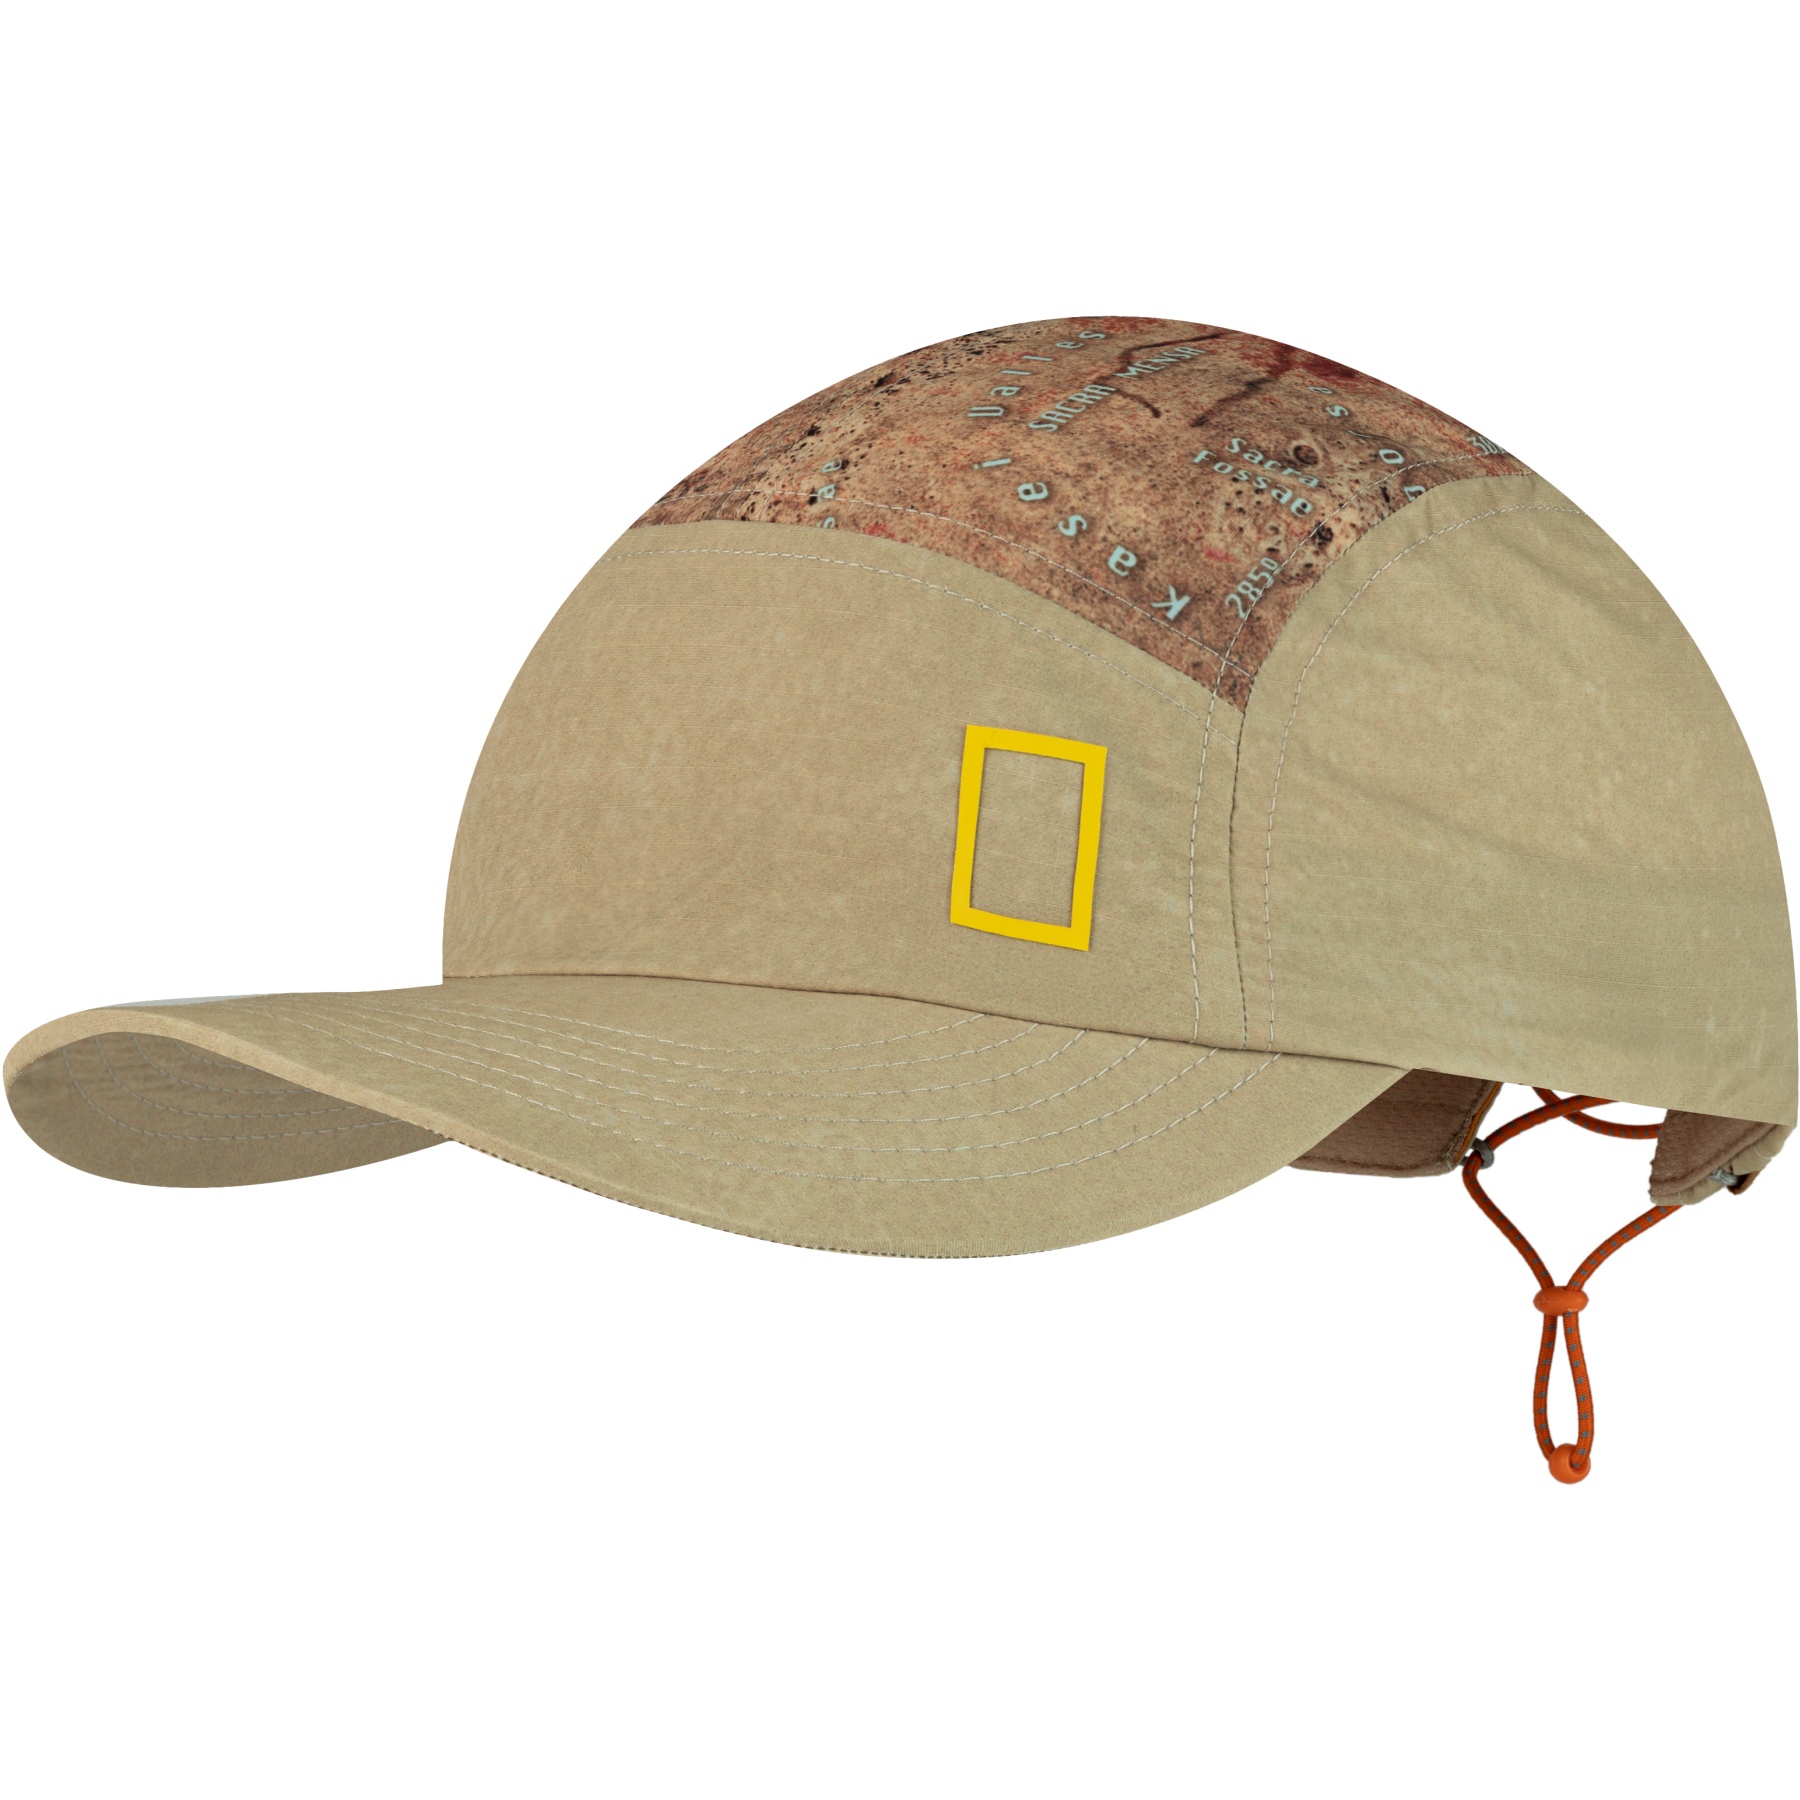 Picture of Buff® (National Geographic) 5 Panel Explore Cap - Geos Brindle